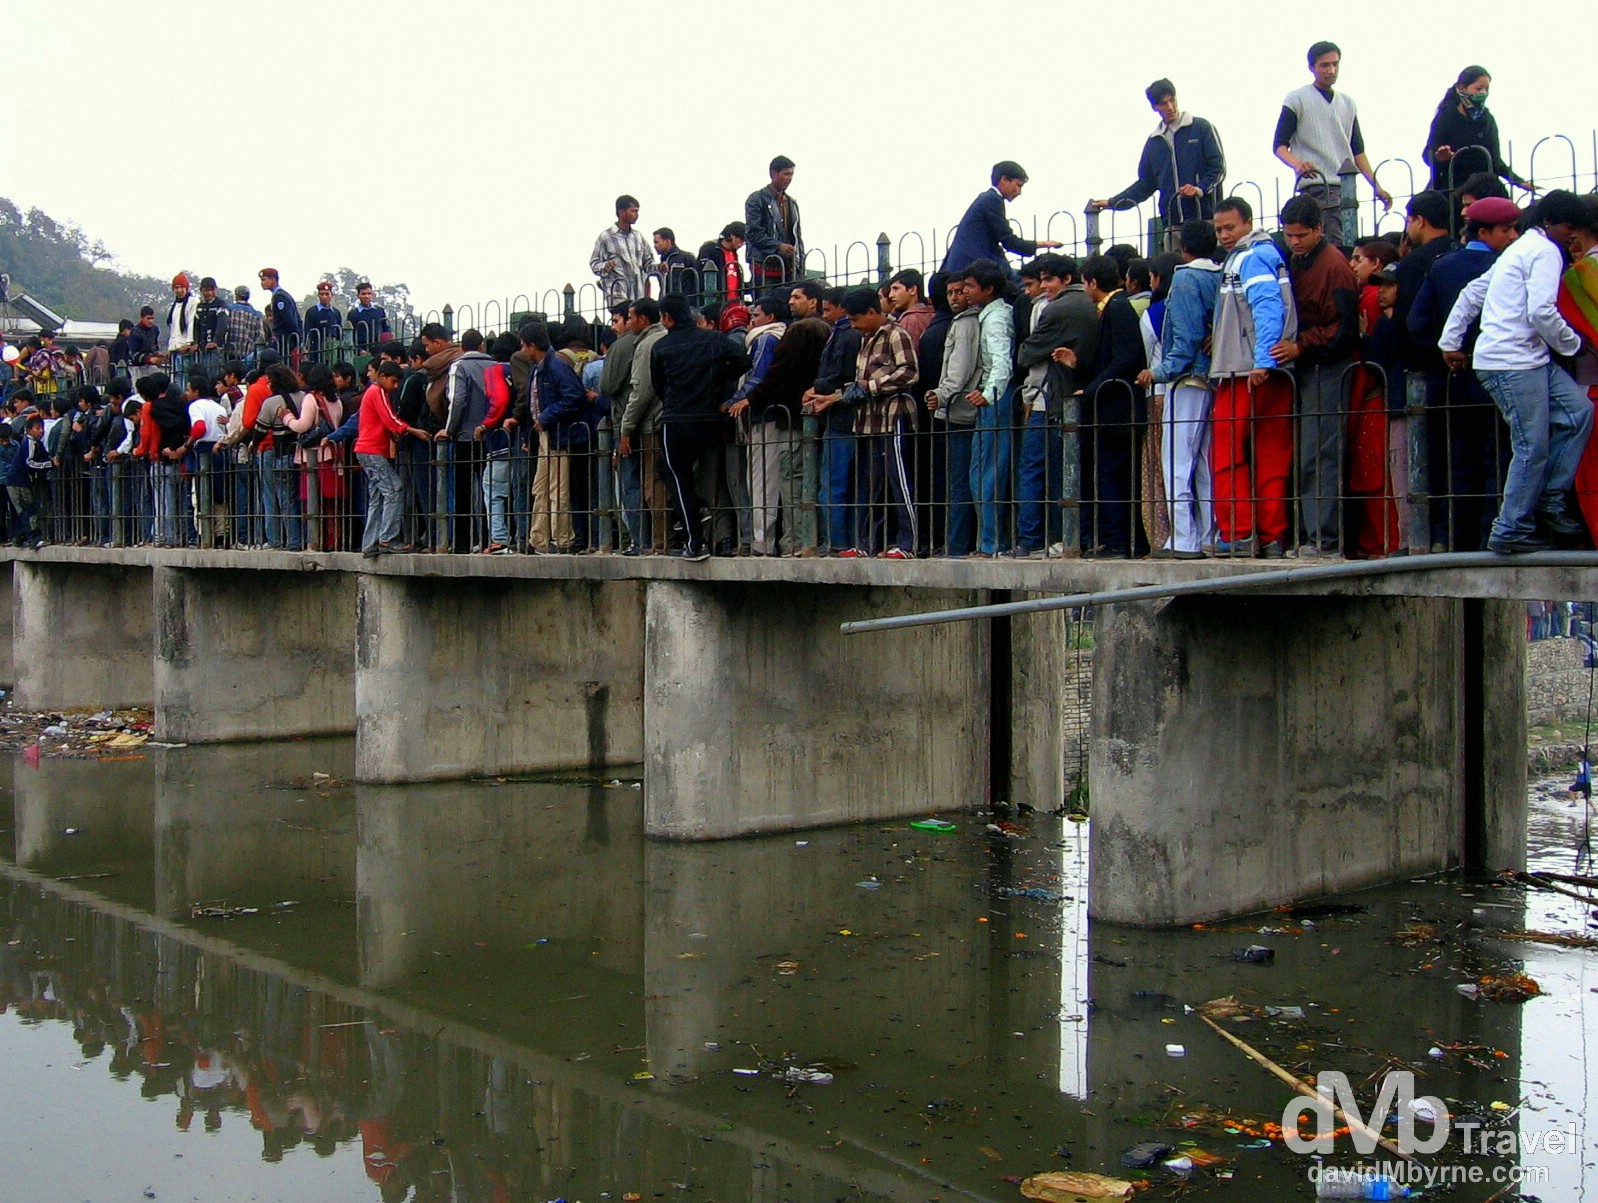 Crowds in the grounds of the Pashupatinath temple on the day of the festival celebrating the birthday of the Hindu god Shiva. Kathmandu, Nepal. March 6, 2008.